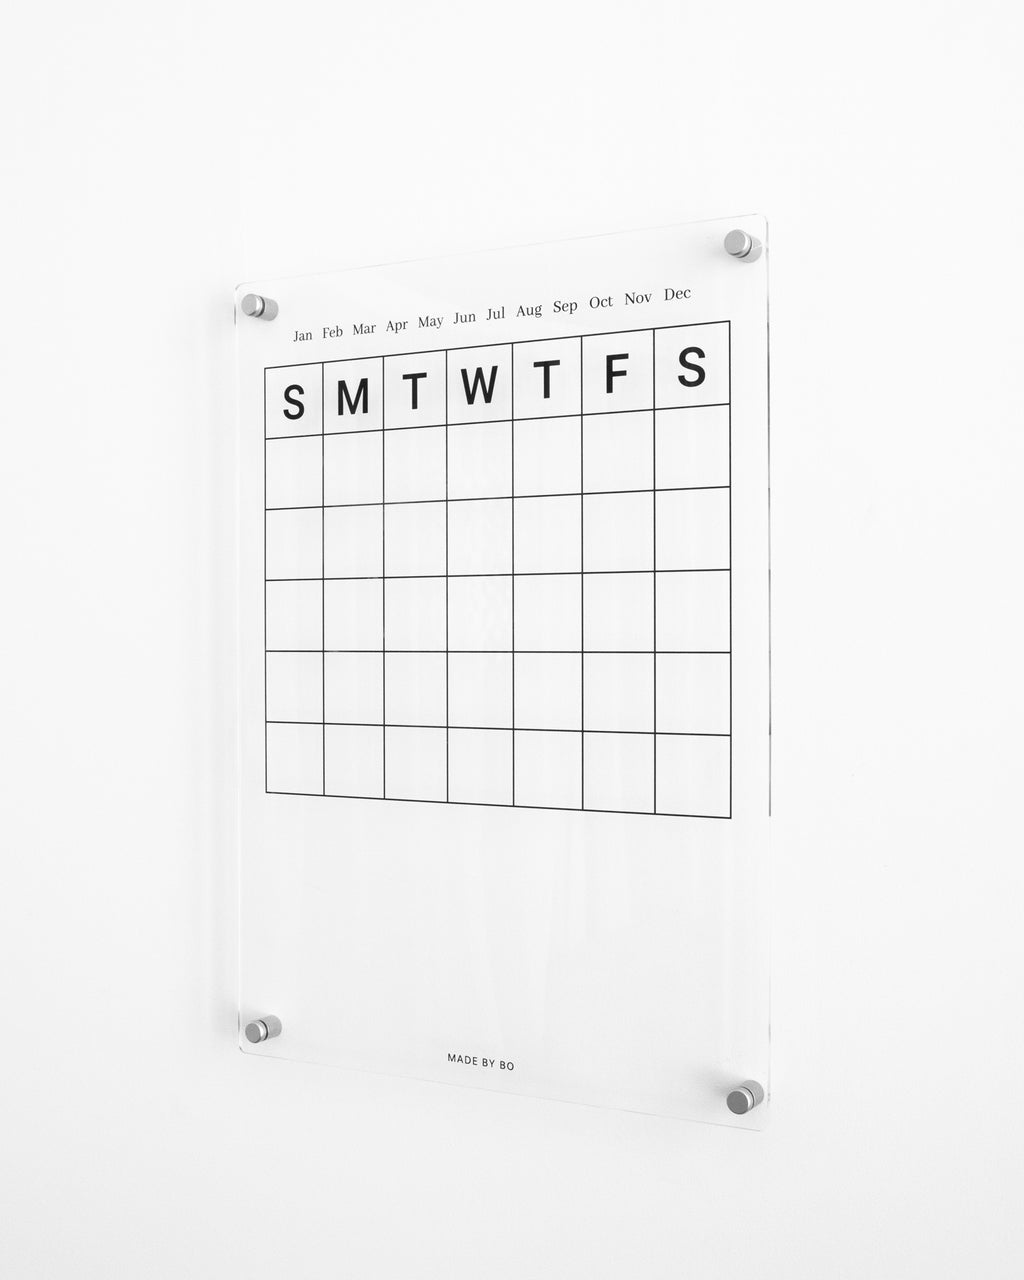 monthly-calendar-with-notes-made-by-bo